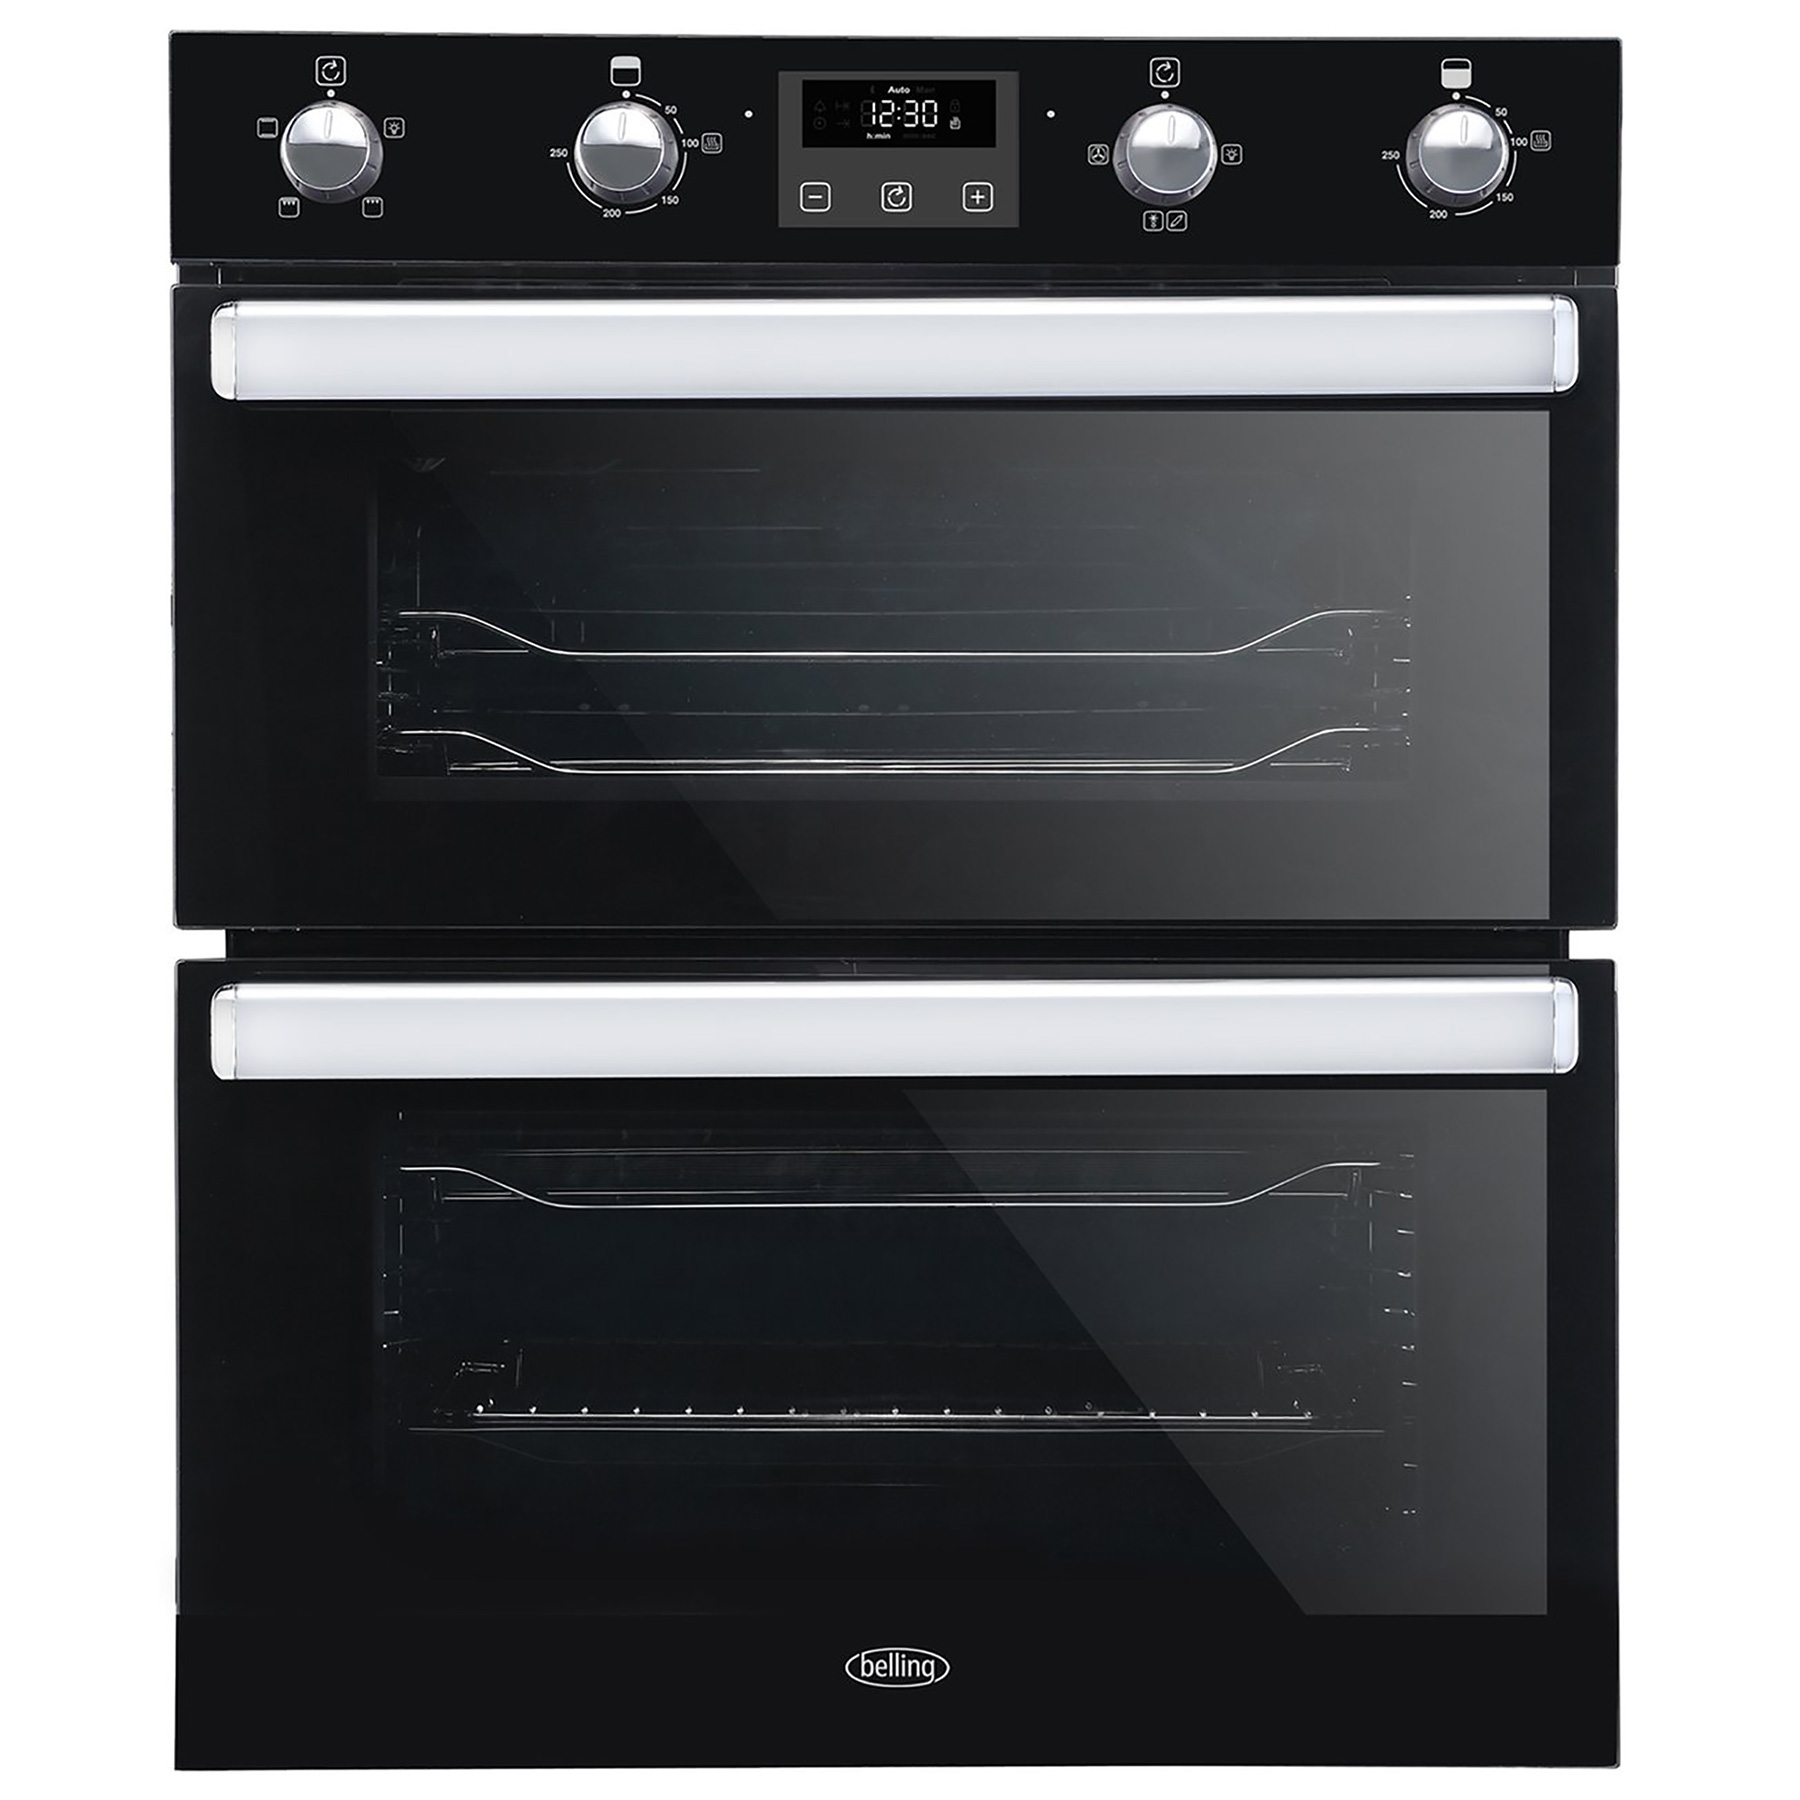 Image of Belling 444444782 70cm Built Under Electric Double Oven Black